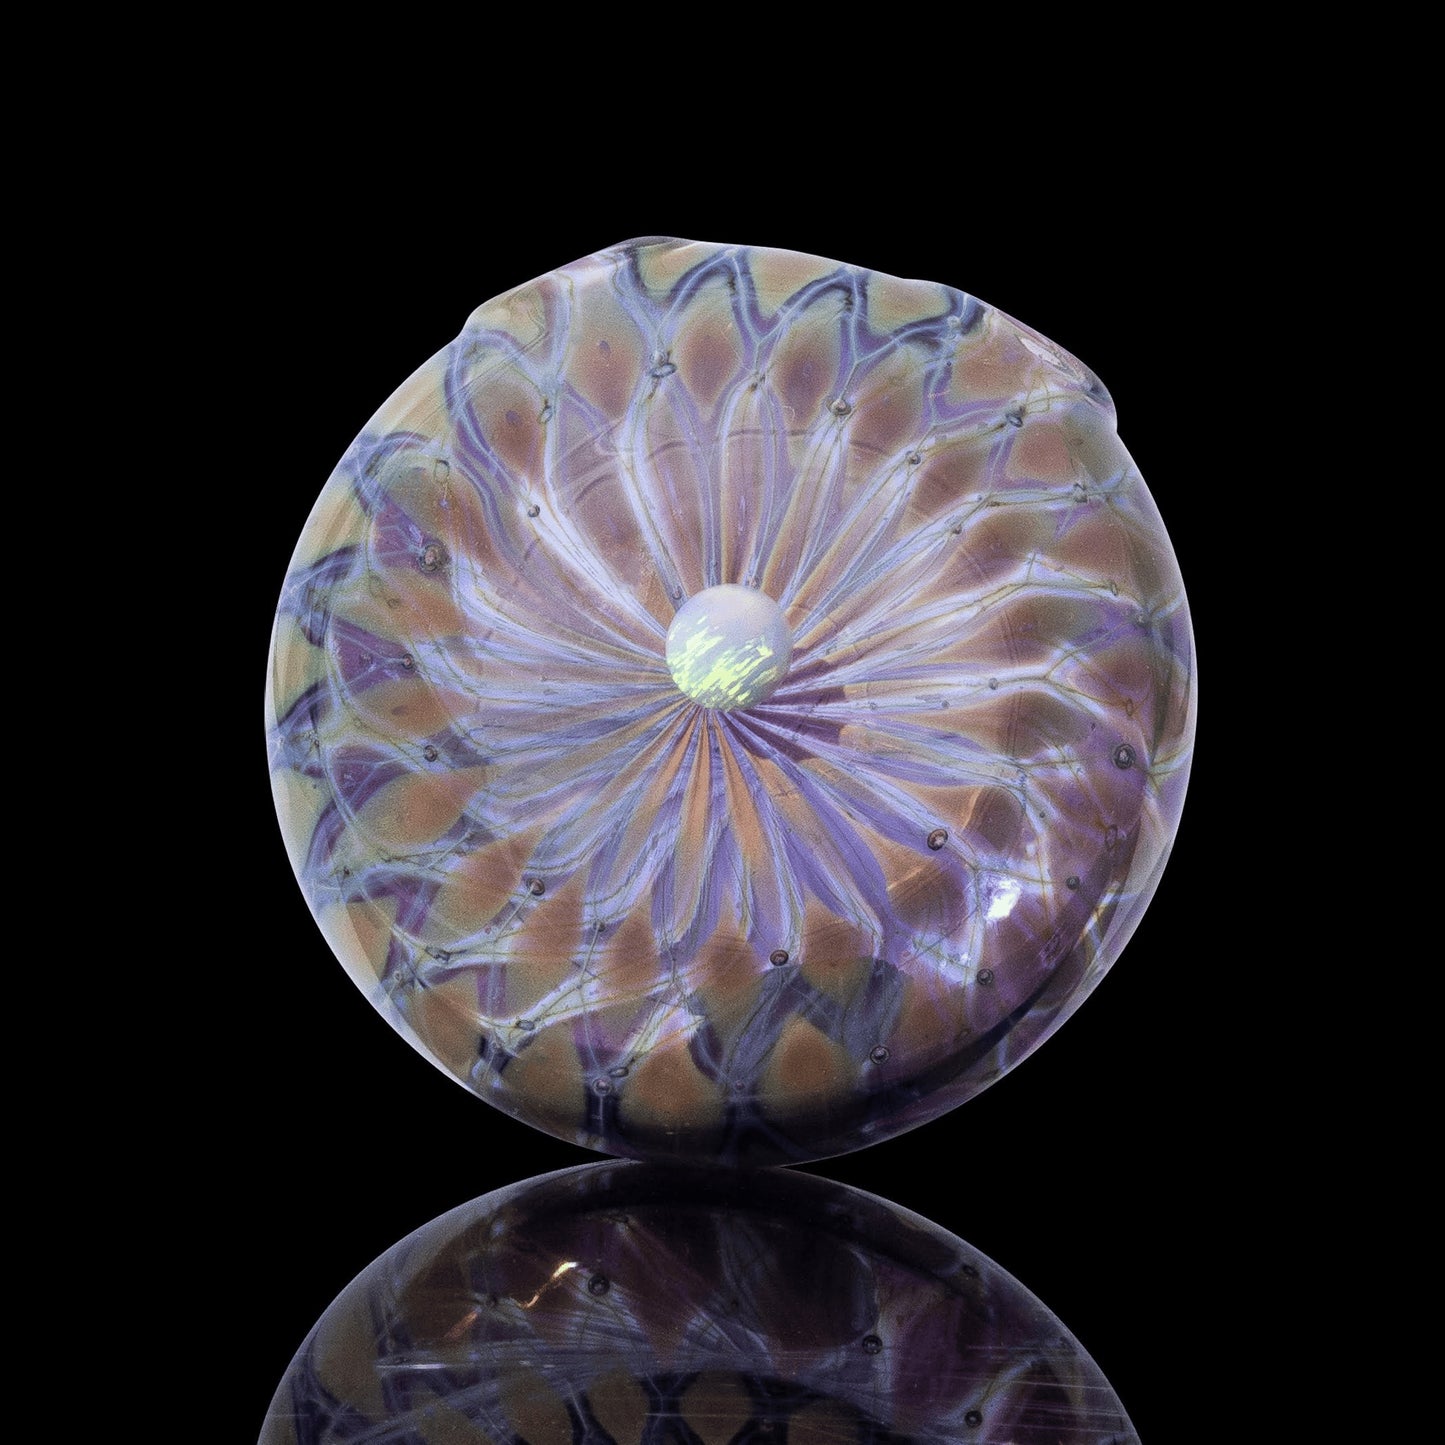 exquisite glass pendant - Pineapple Pattern Disk Pendant (C) by Hondo Glass (2022 Release)